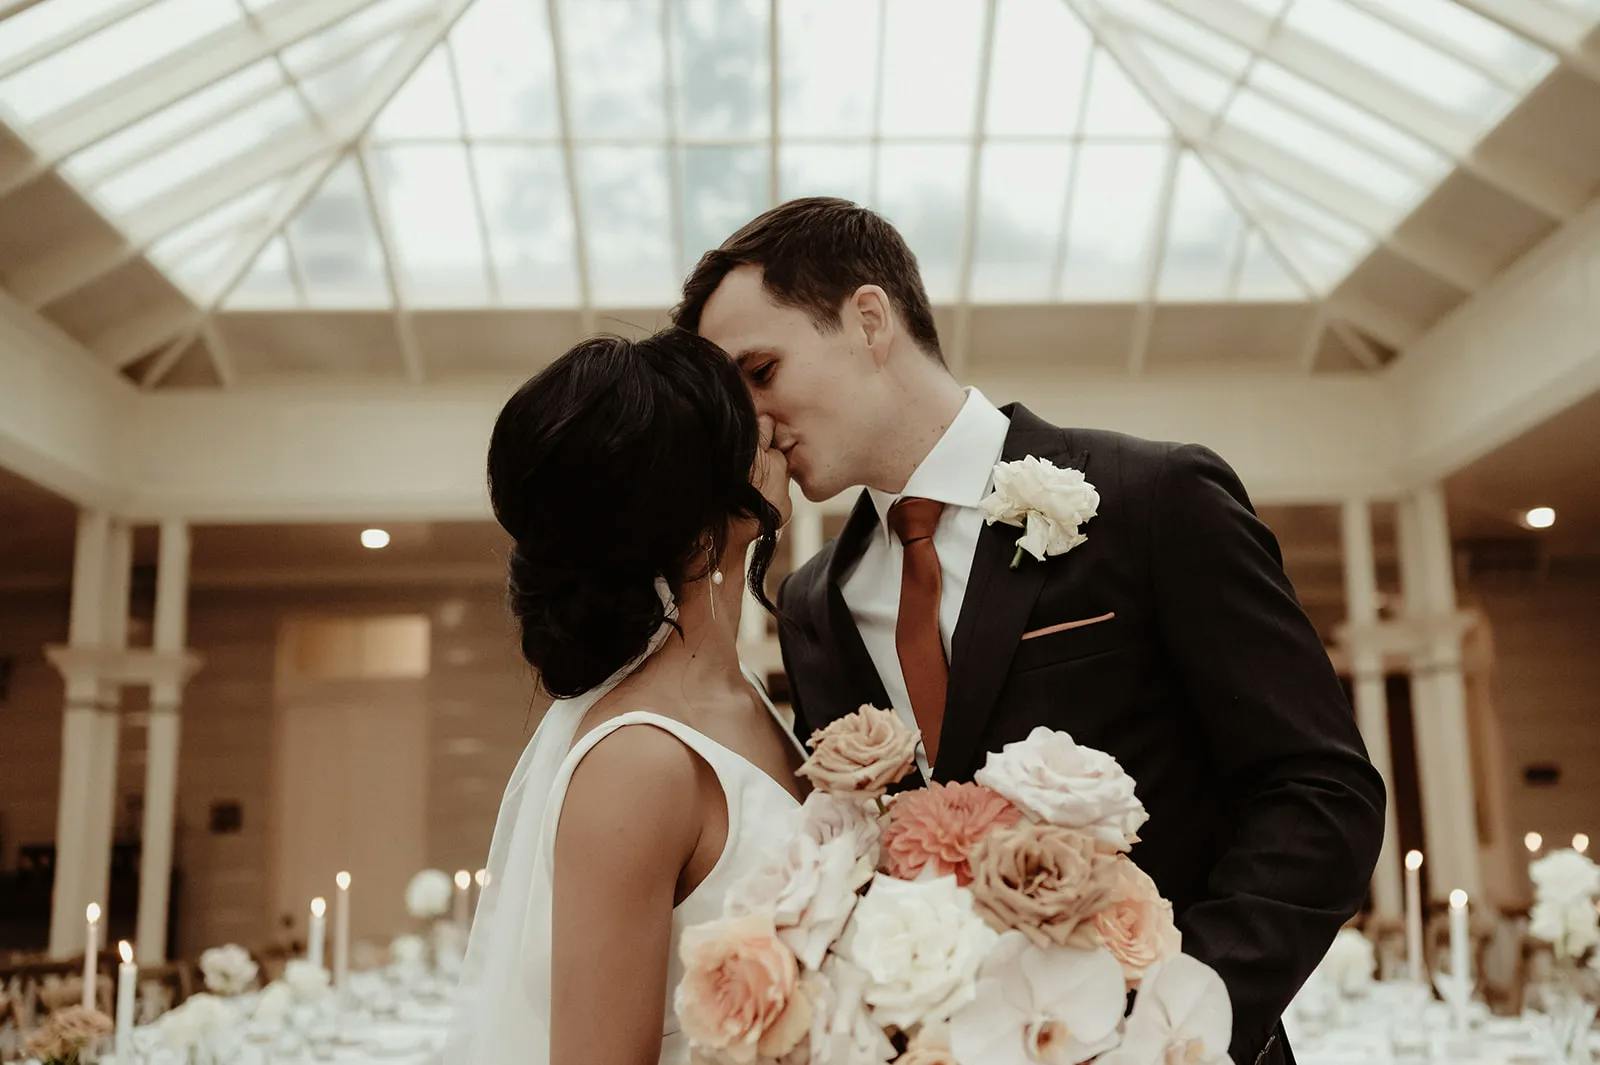 A bride and groom share a kiss under a glass-ceilinged venue adorned with white floral arrangements and candles. The bride holds a bouquet of pastel-colored roses, and both are dressed in formal attire with the groom in a dark suit and the bride in a sleeveless gown.